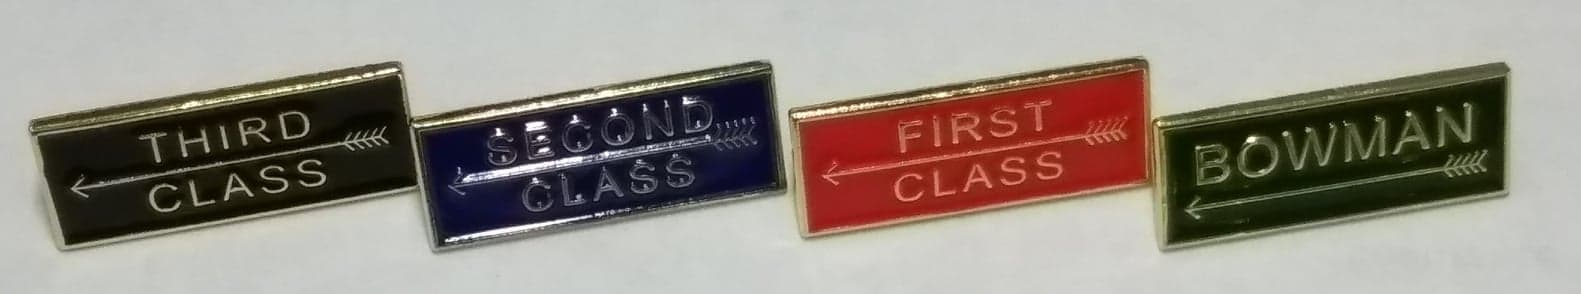 Outdoor Classification Badges